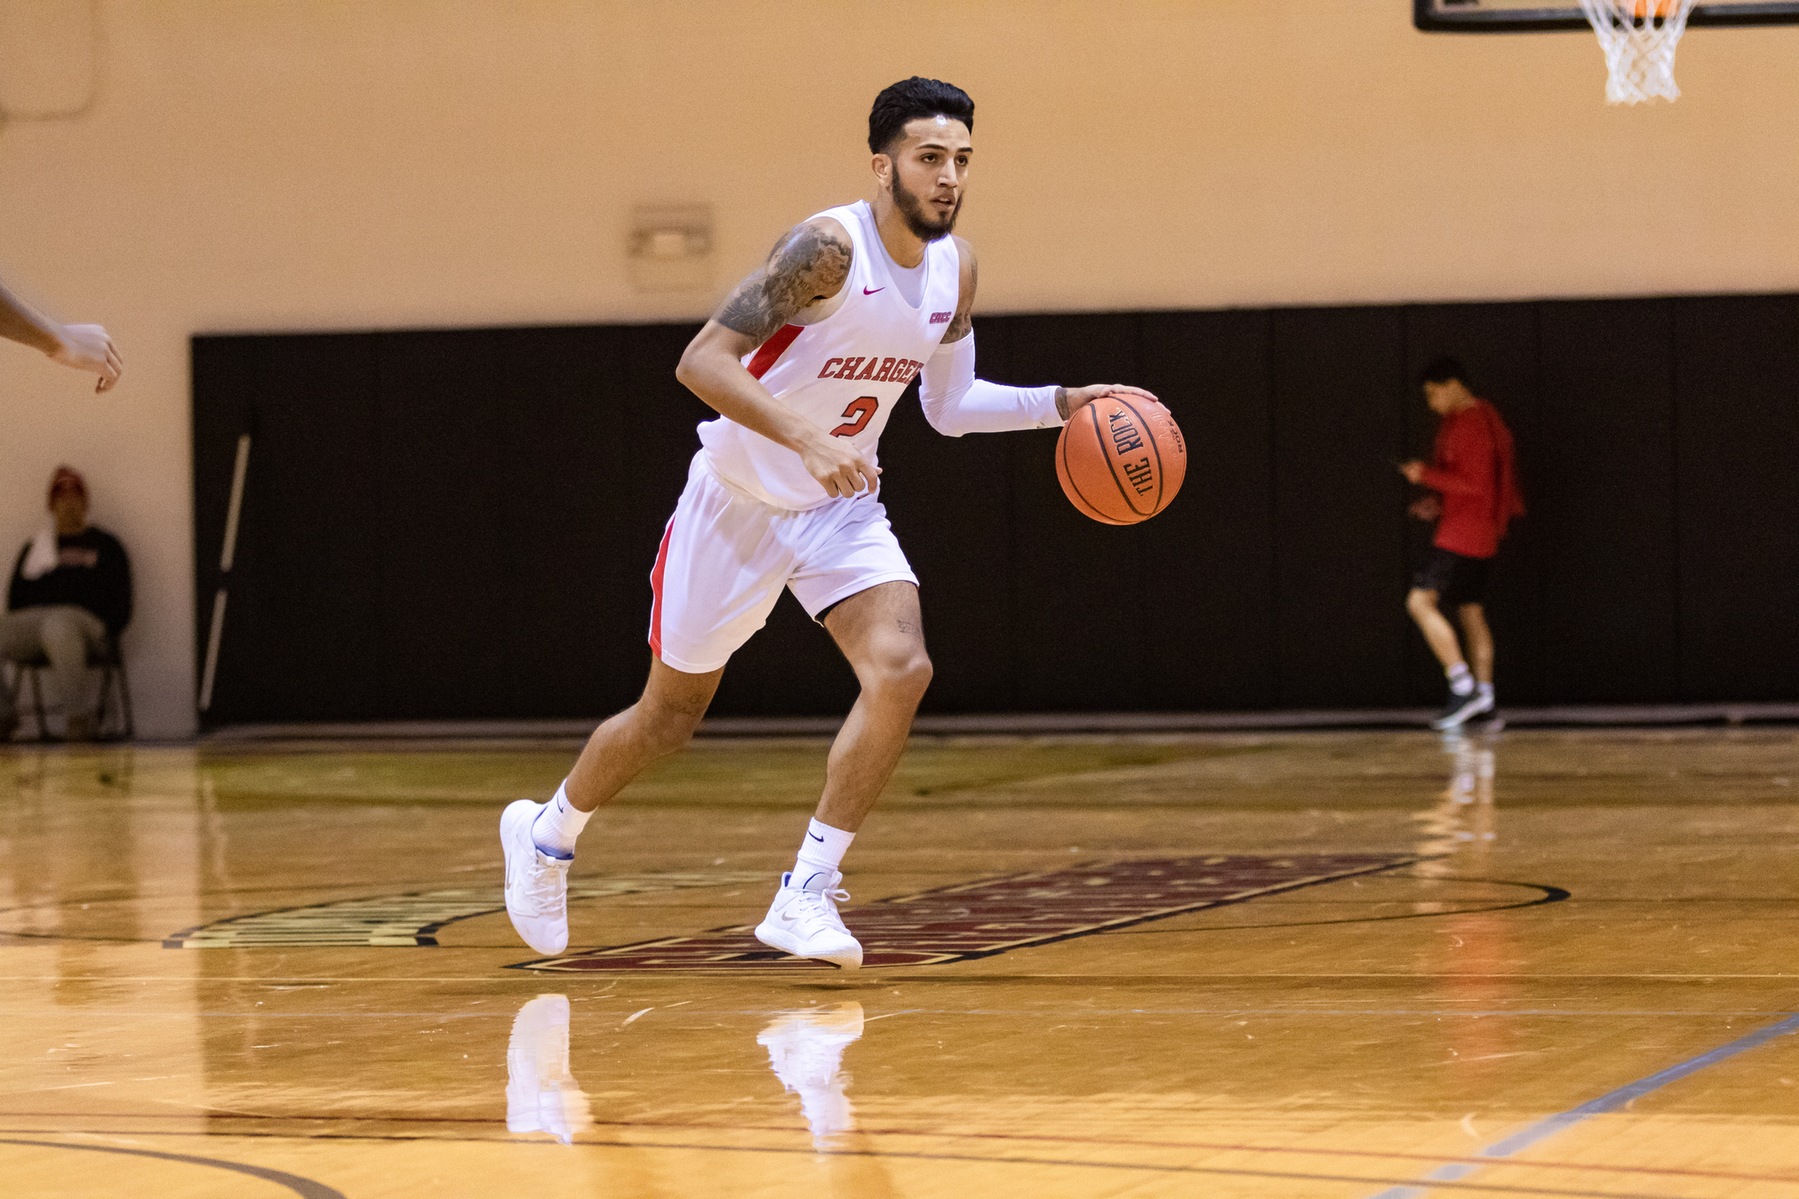 MEN'S BASKETBALL REMAINS UNBEATEN WITH WIN OVER STAC